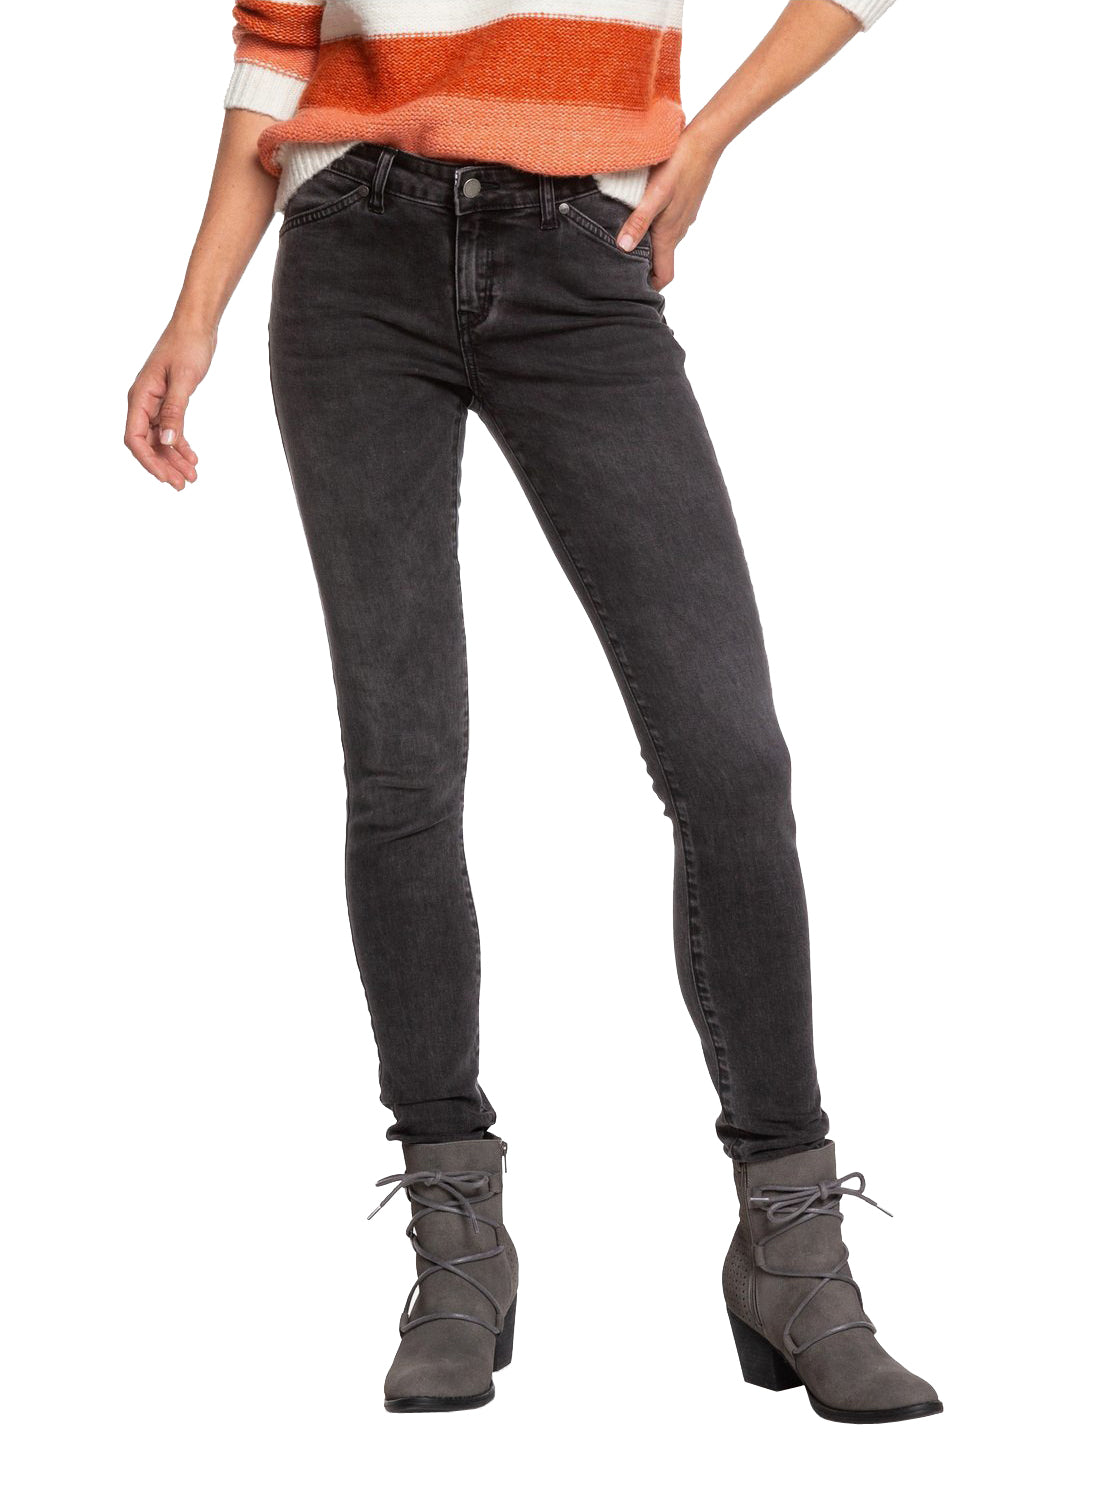 Roxy Stand By You Skinny Fit Jeans